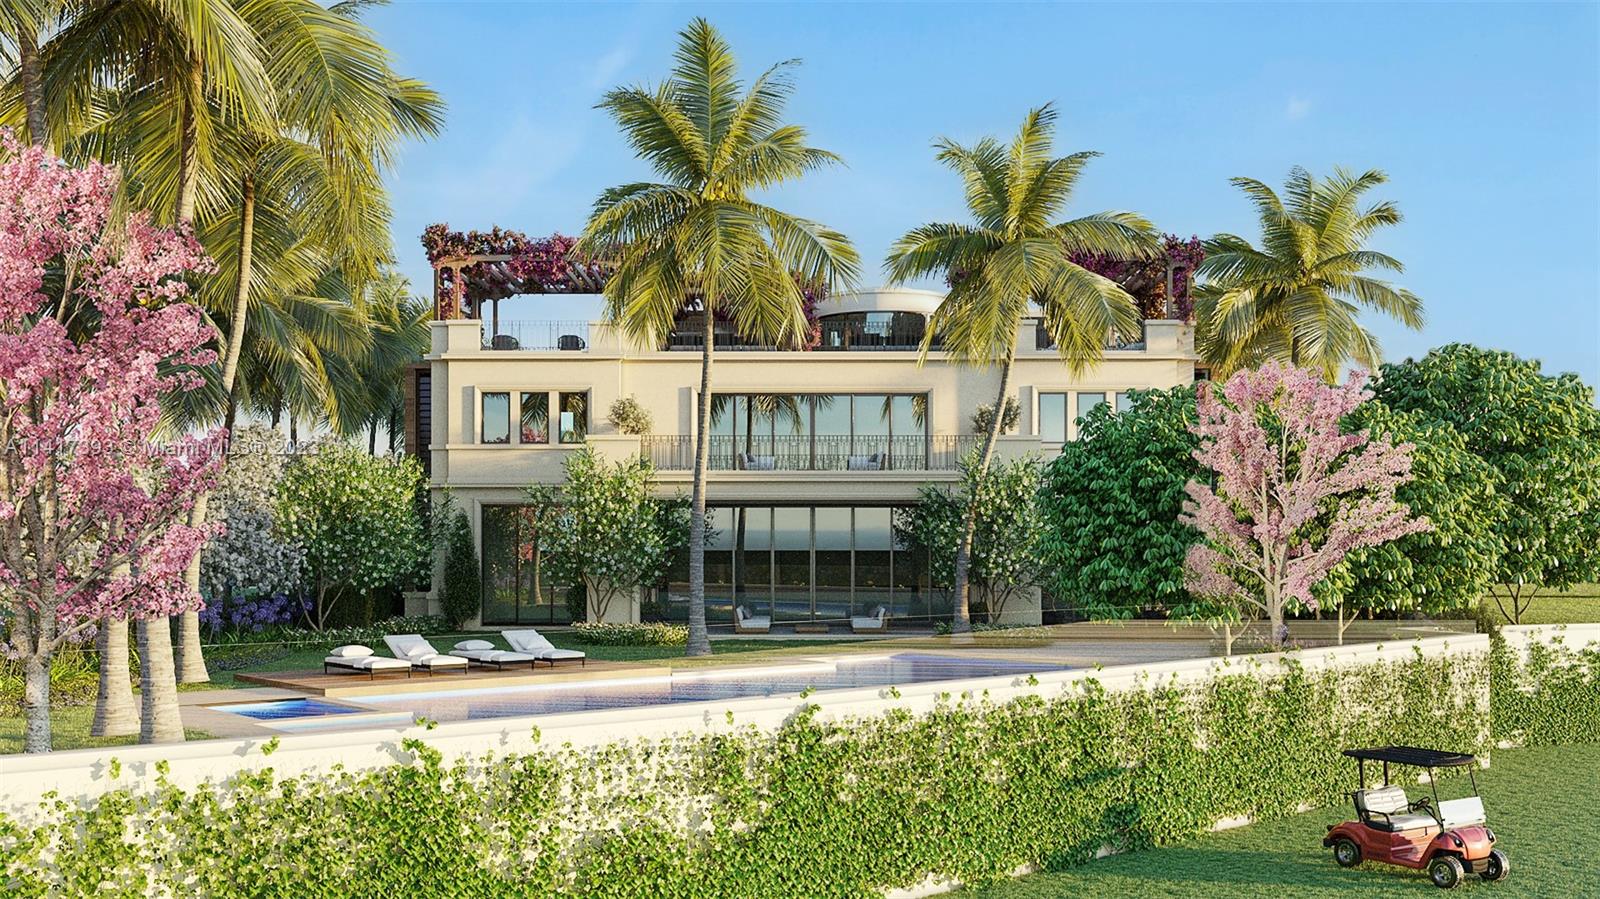 1010 Fisher Island Drive, Fisher Island, Miami-Dade County, Florida - 7 Bedrooms  
10 Bathrooms - 